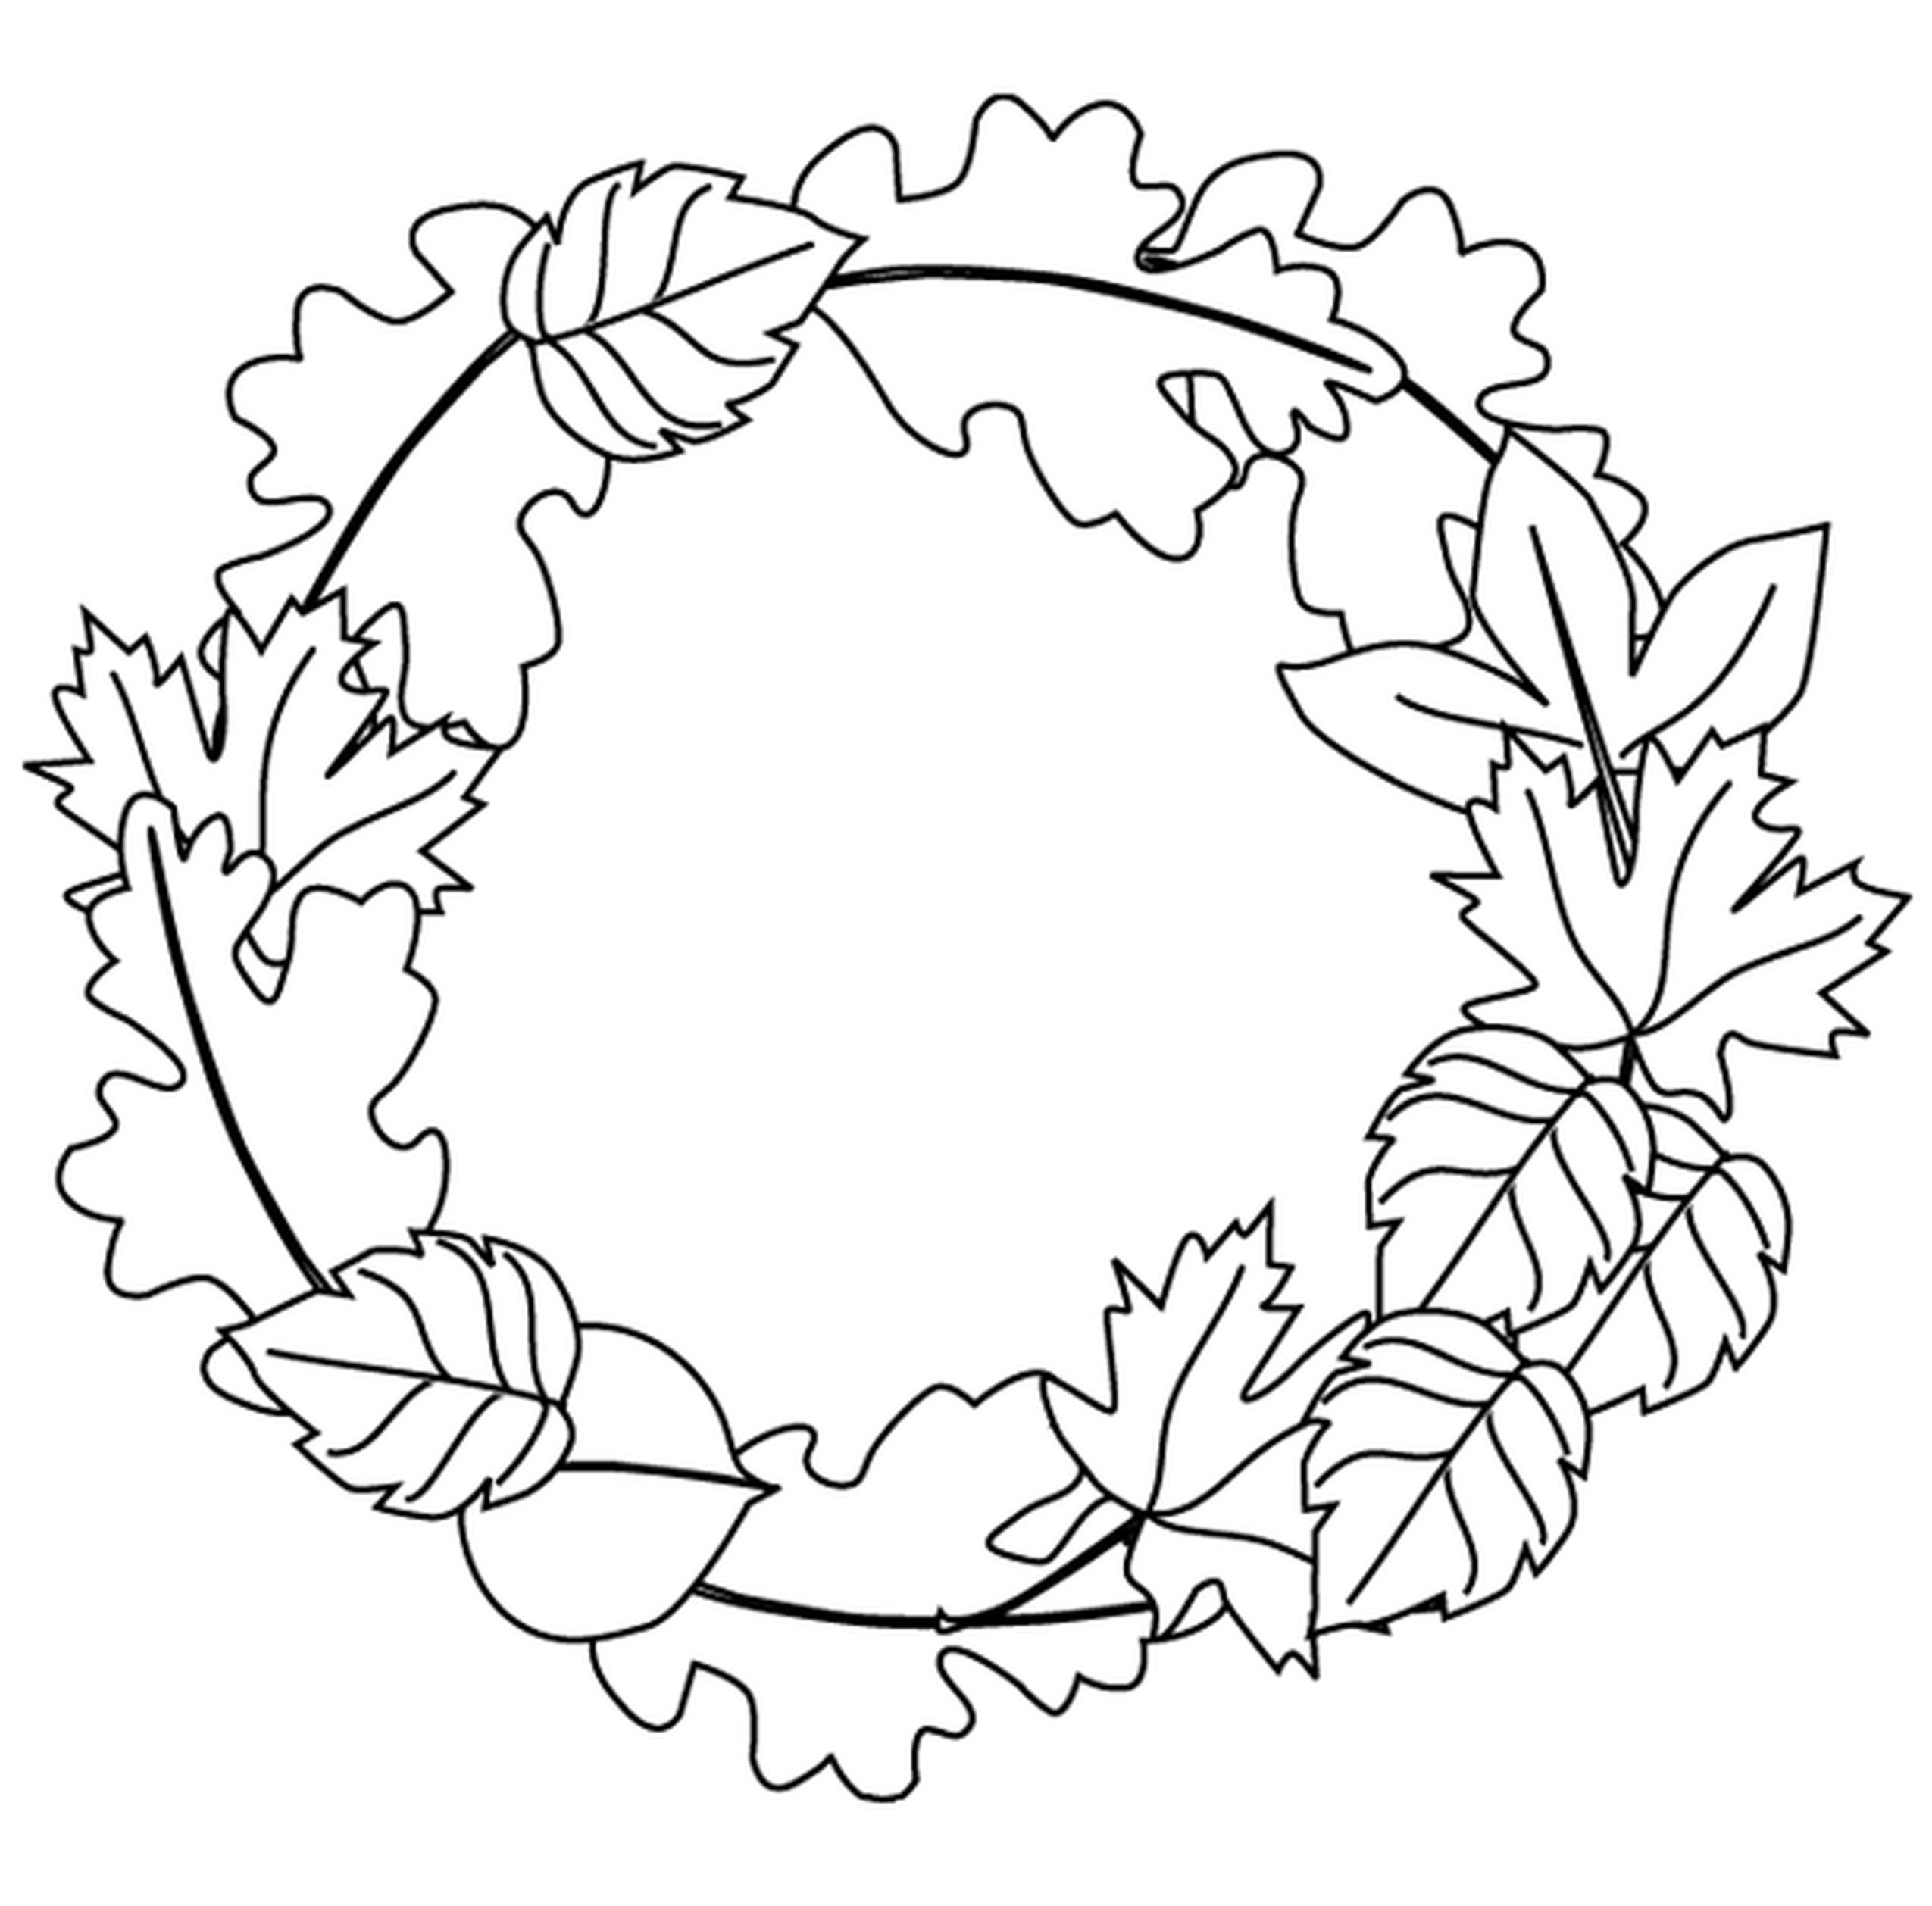 Fall Coloring Pages
 Autumn Leaves Coloring Pages Bestofcoloring